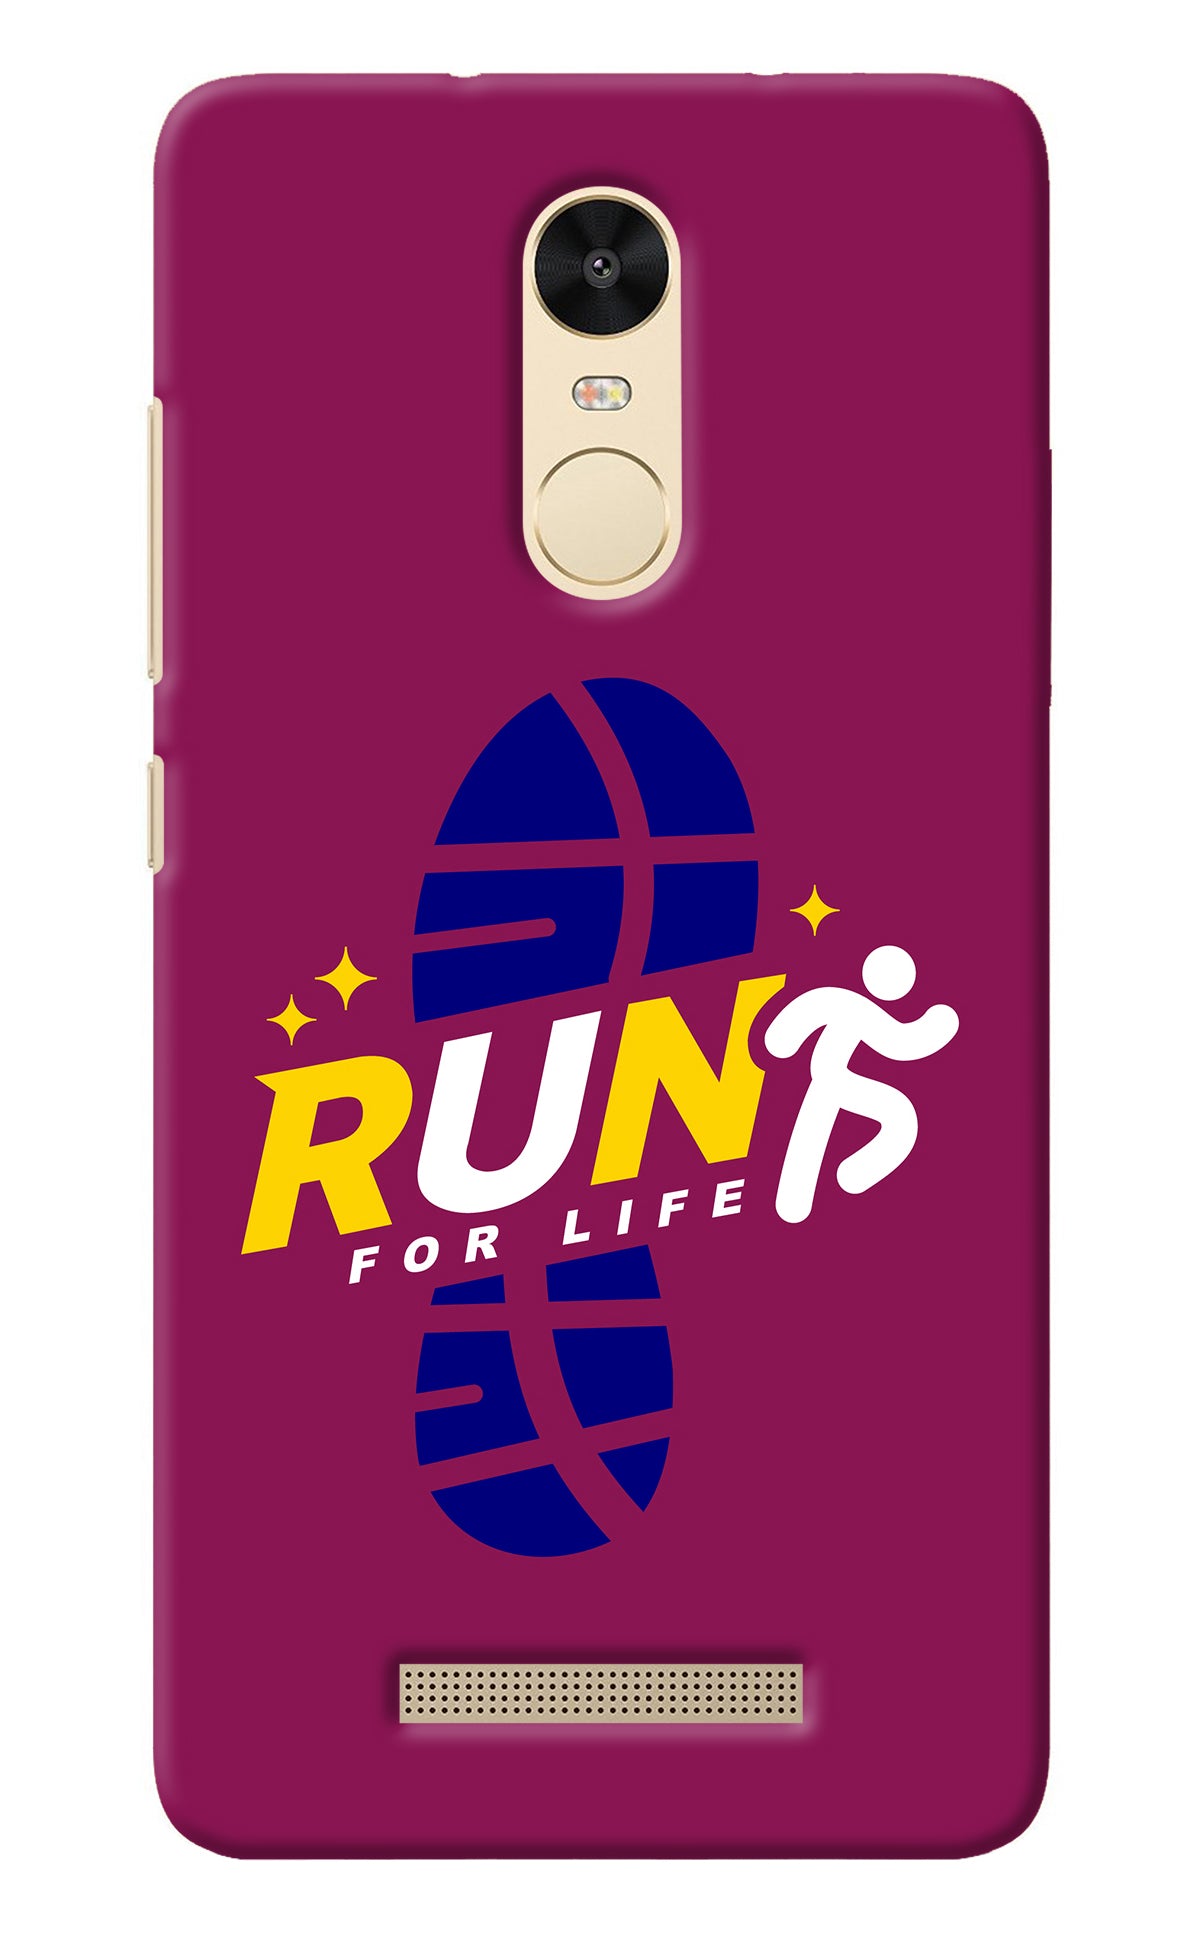 Run for Life Redmi Note 3 Back Cover